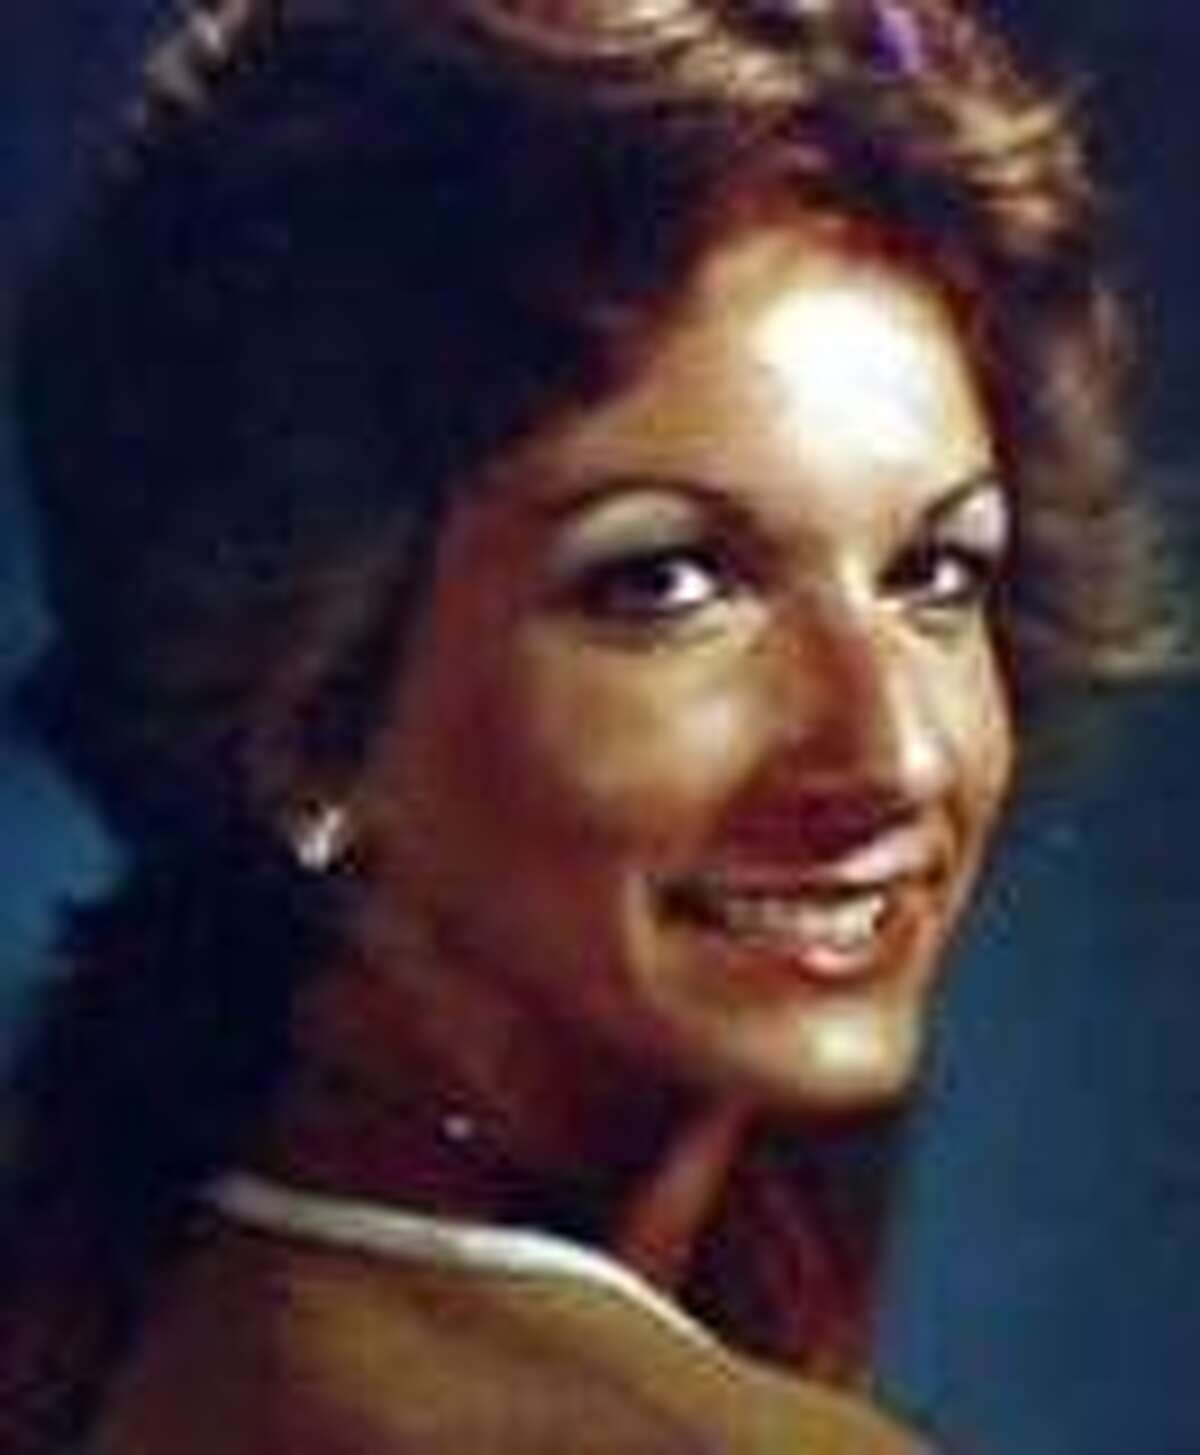 April Grisanti was last seen leaving Anthony’s Bar on Feb. 1, 1985. She has never been seen again.